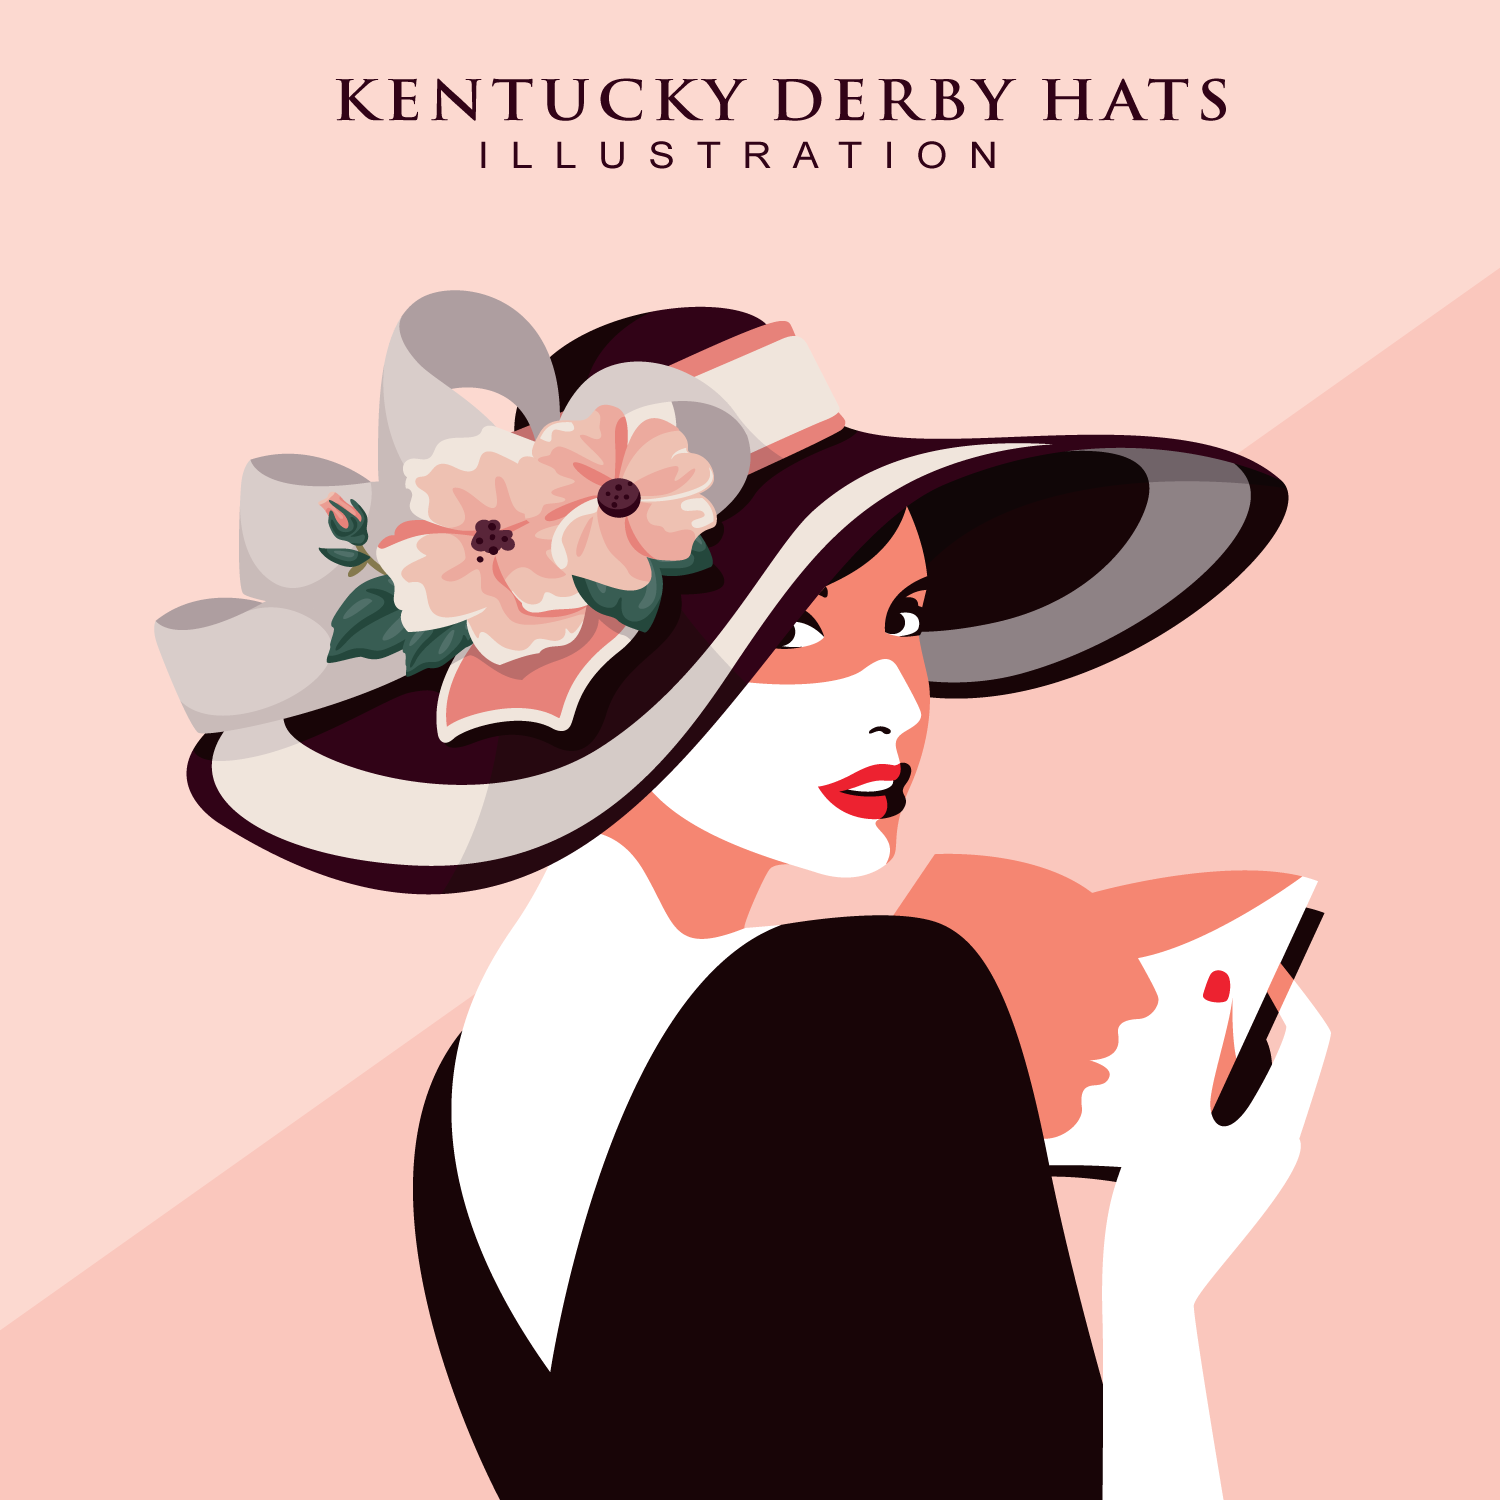 Kentucky Derby Hats Illustration Download Free Vector